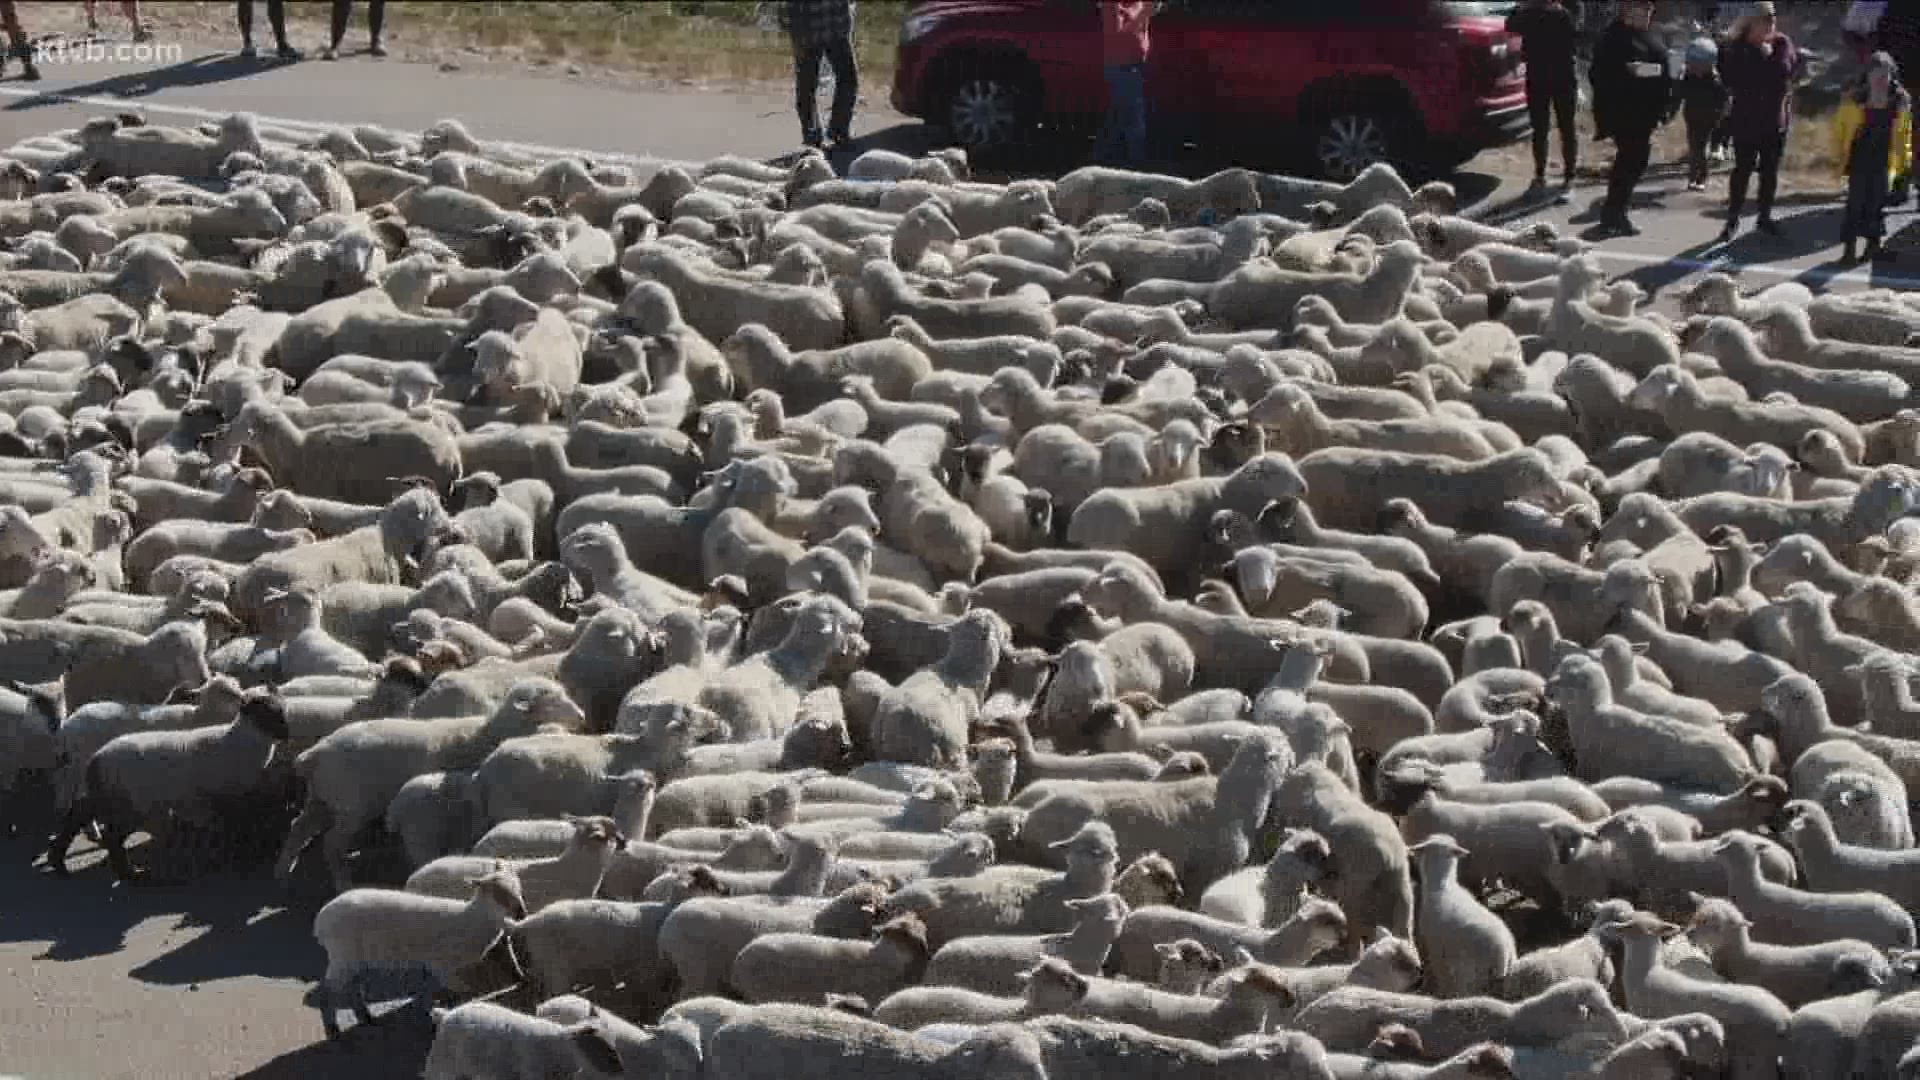 Spectators lined up on both sides of the highway to watch Wilder sheep rancher Frank Shirts move nearly 2,600 ewes and lambs into the Boise Foothills.